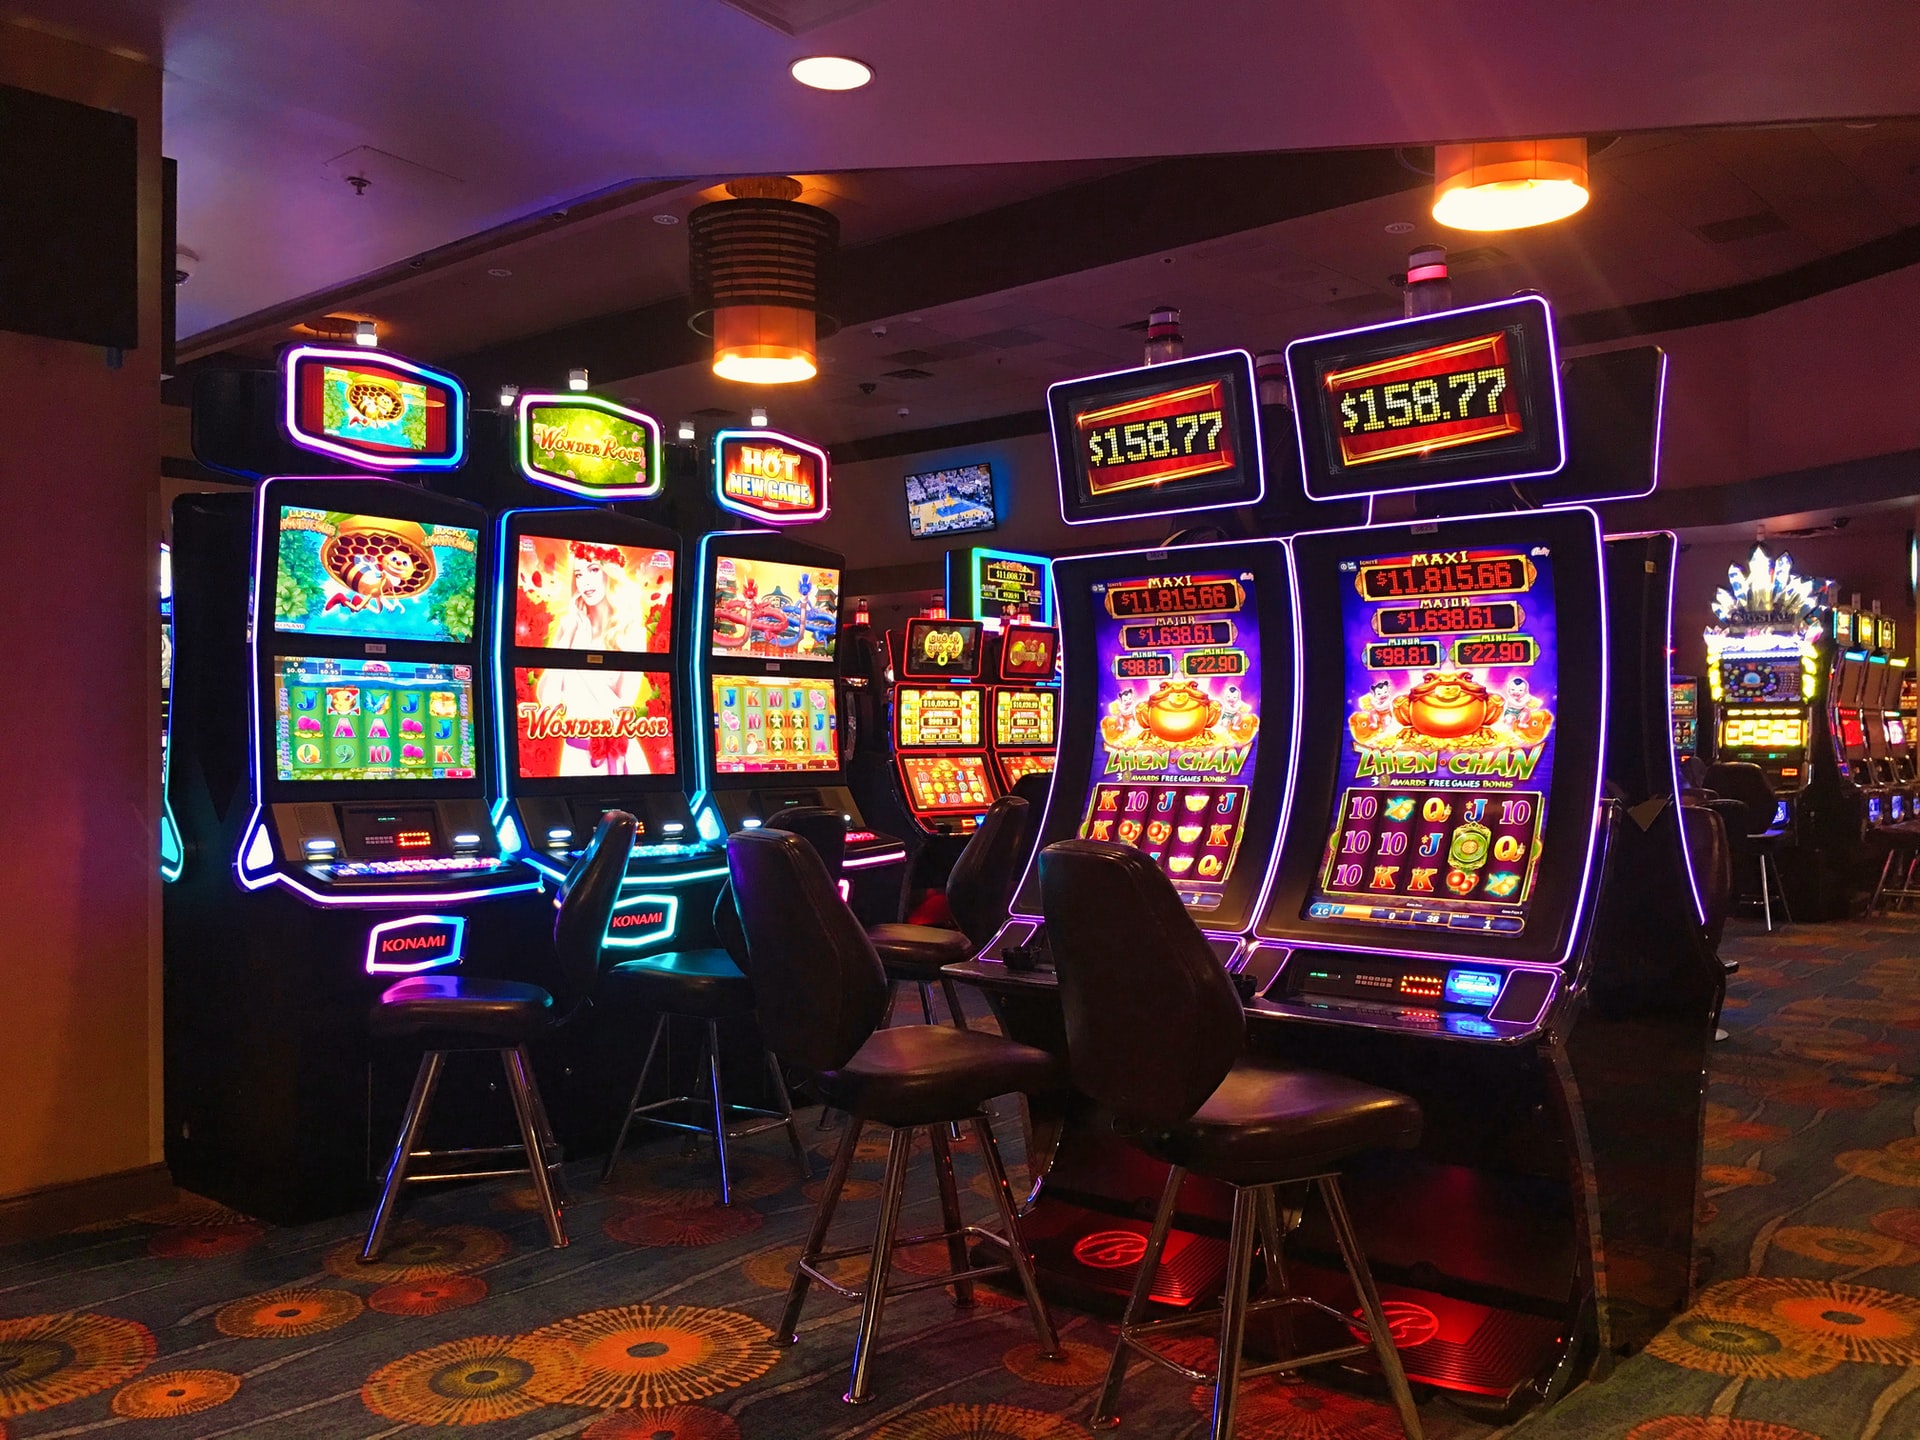 Can You Use a Strategy When You Play Online Slots? - Armchair Arcade